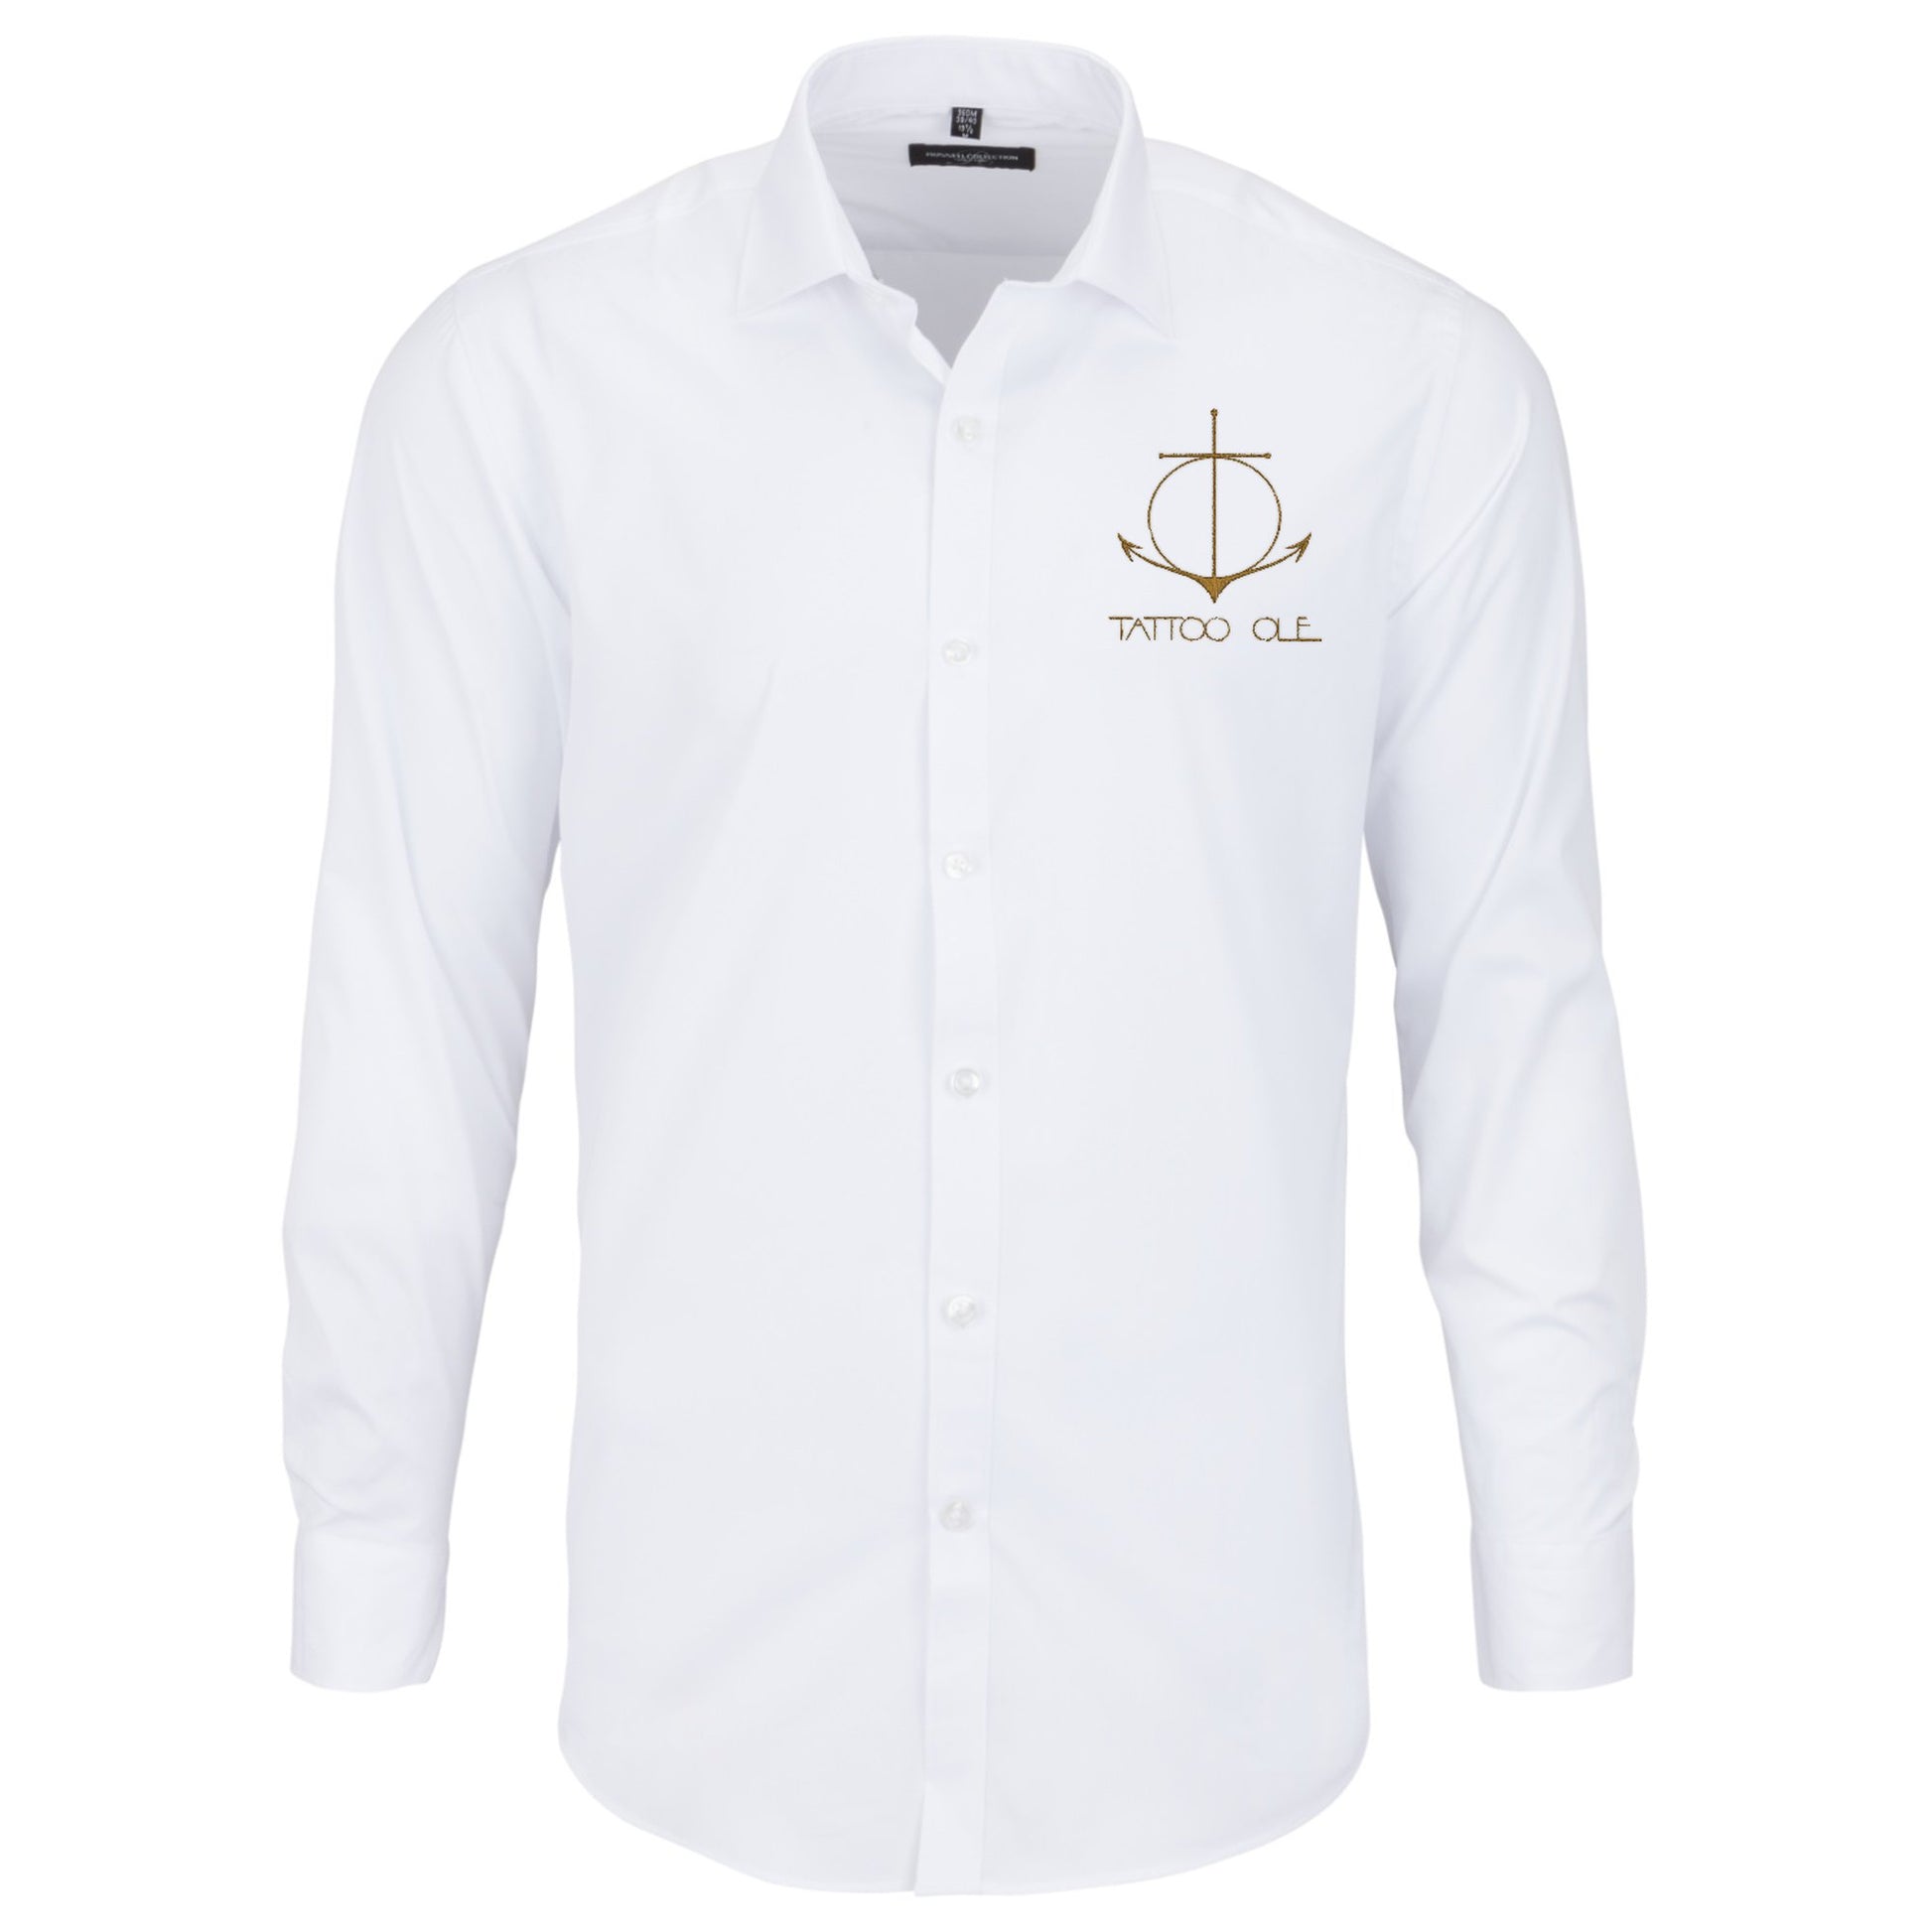 Tattoo Ole slim fit exclusive shirt white with anchor